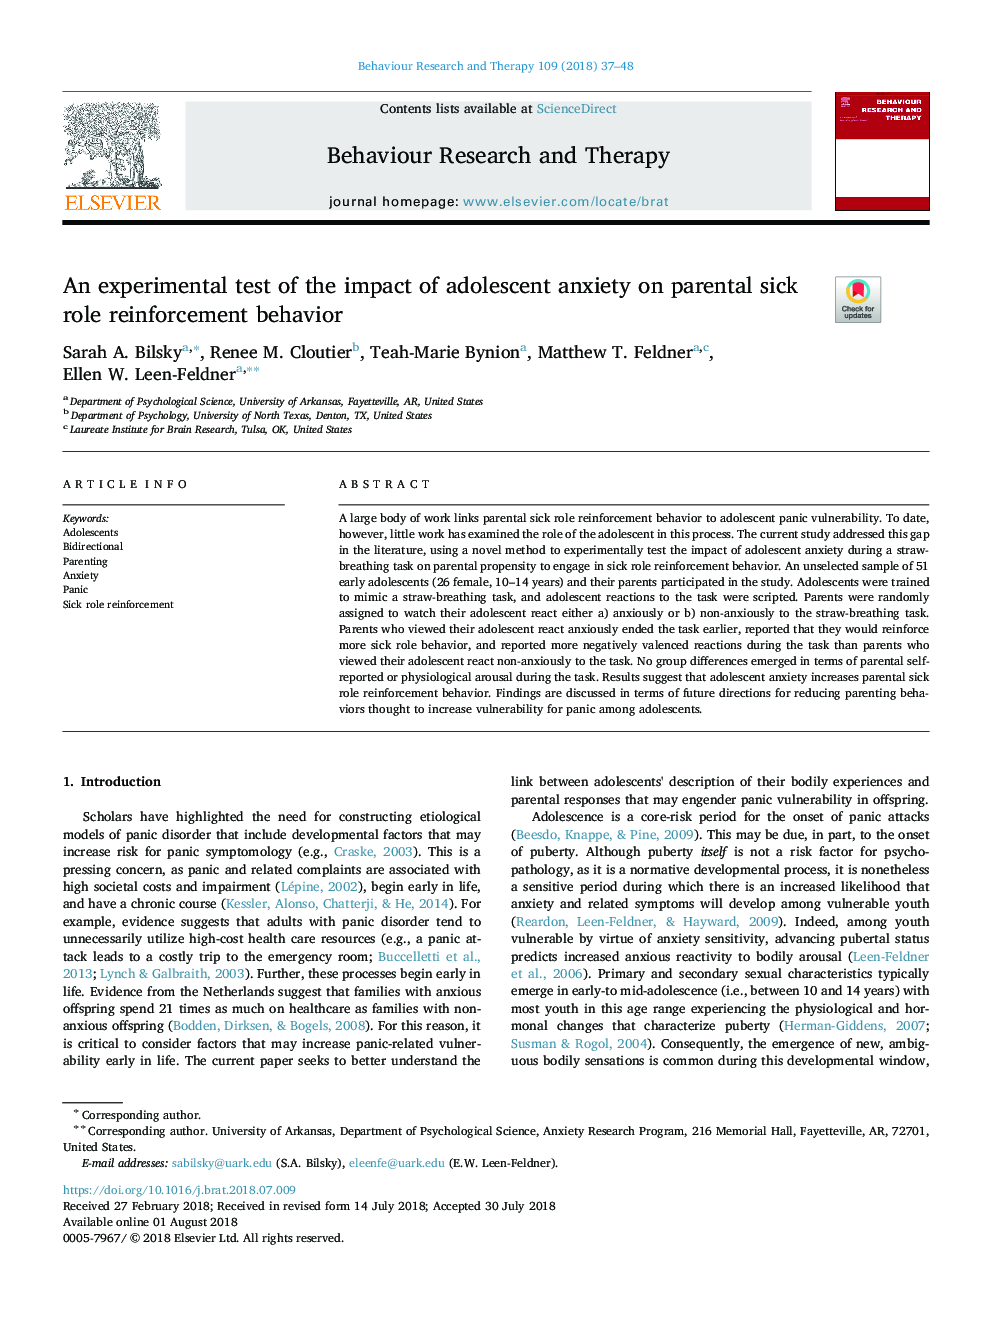 An experimental test of the impact of adolescent anxiety on parental sick role reinforcement behavior